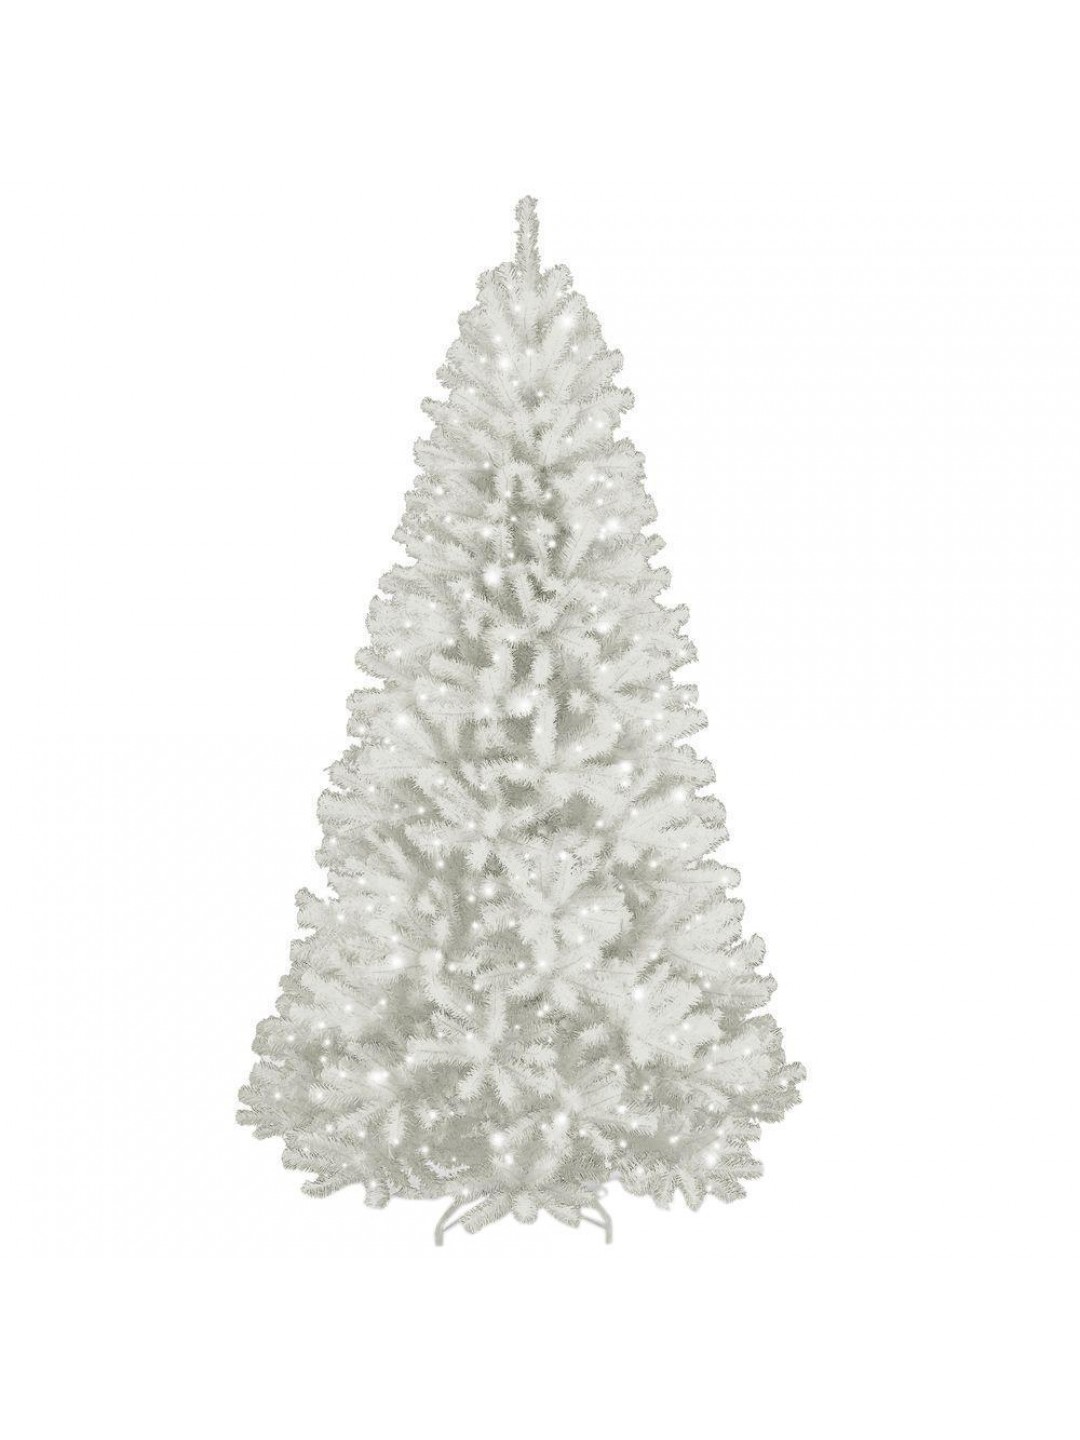 7 ft. North Valley White Spruce Hinged Artificial Christmas Tree with Glitter and 550 Clear Lights